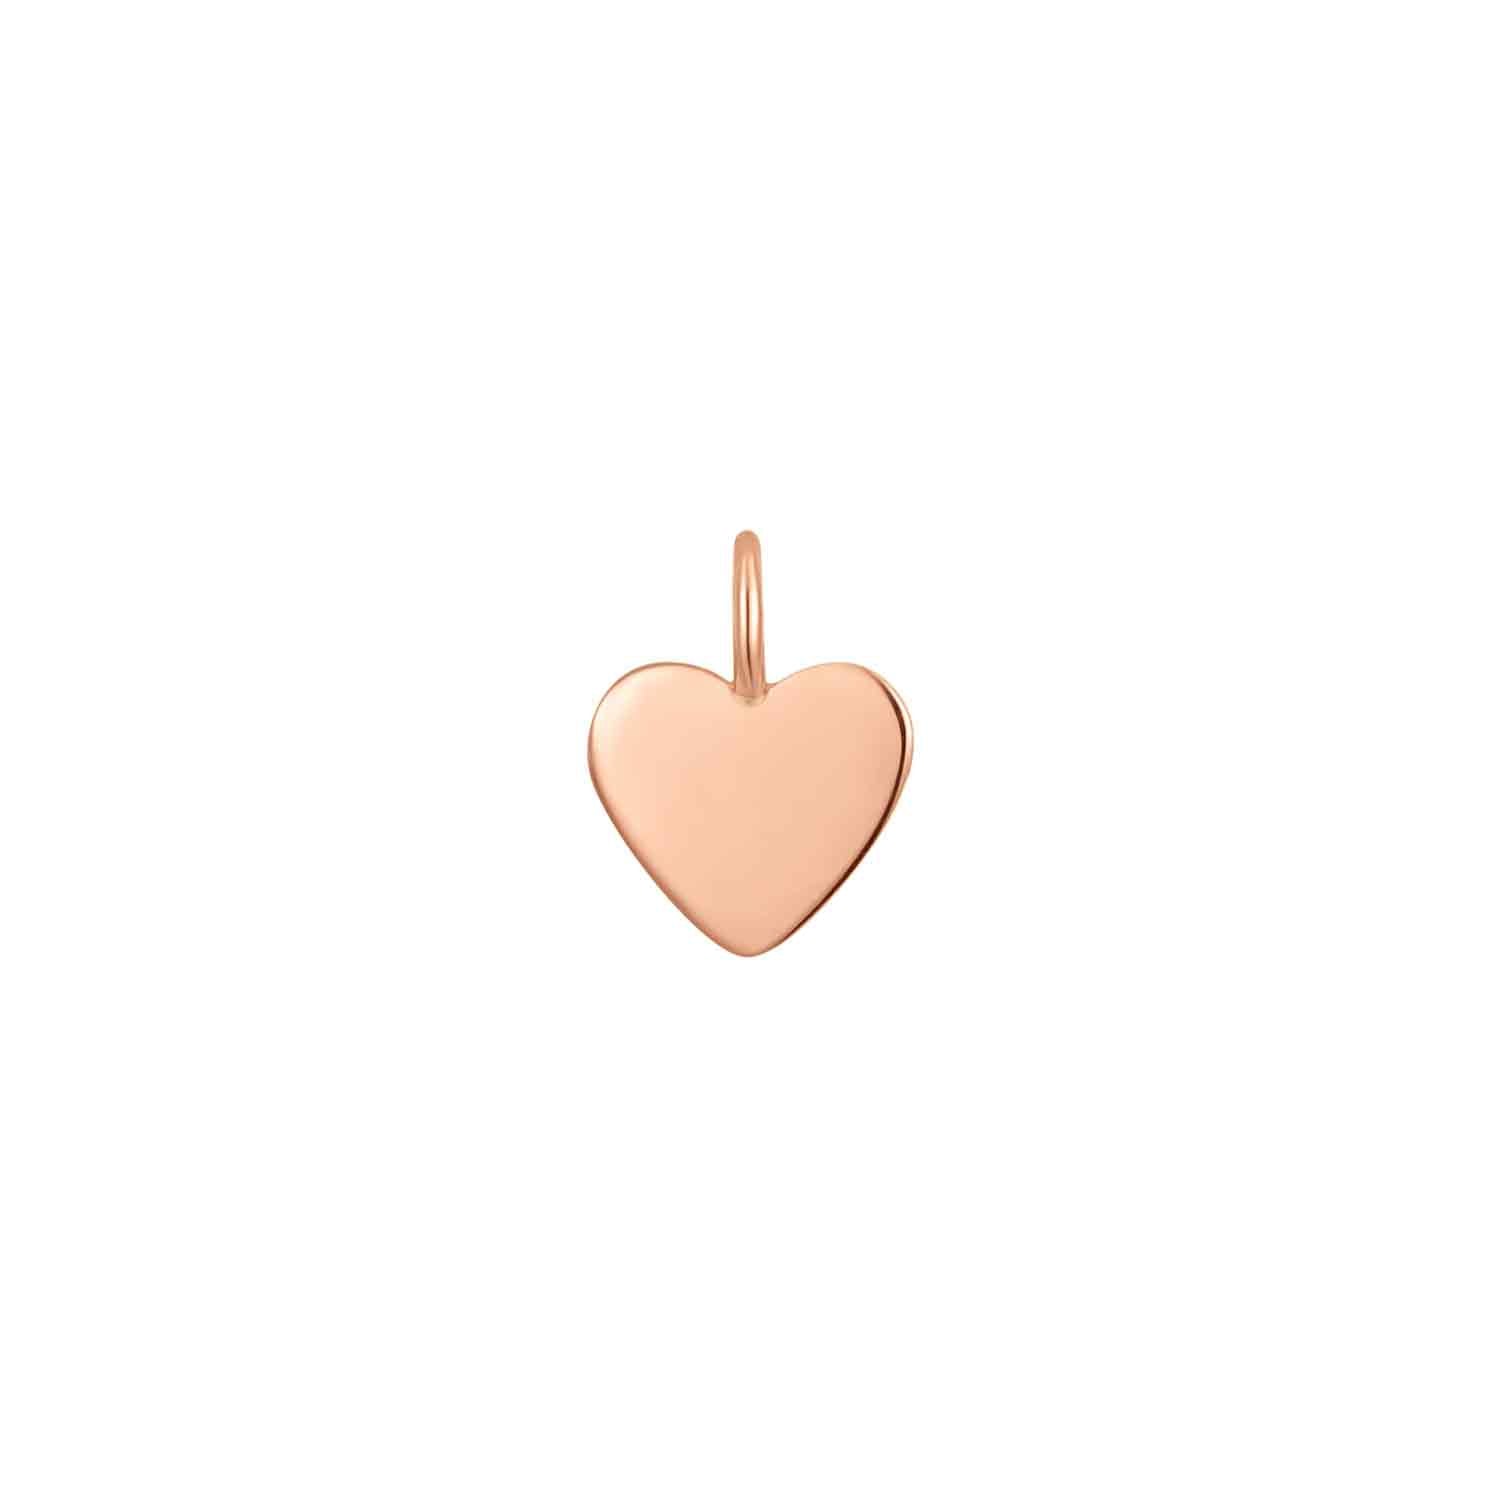 Permanent Jewelry 14K Solid Rose Gold Heart Charm / PMJ2002